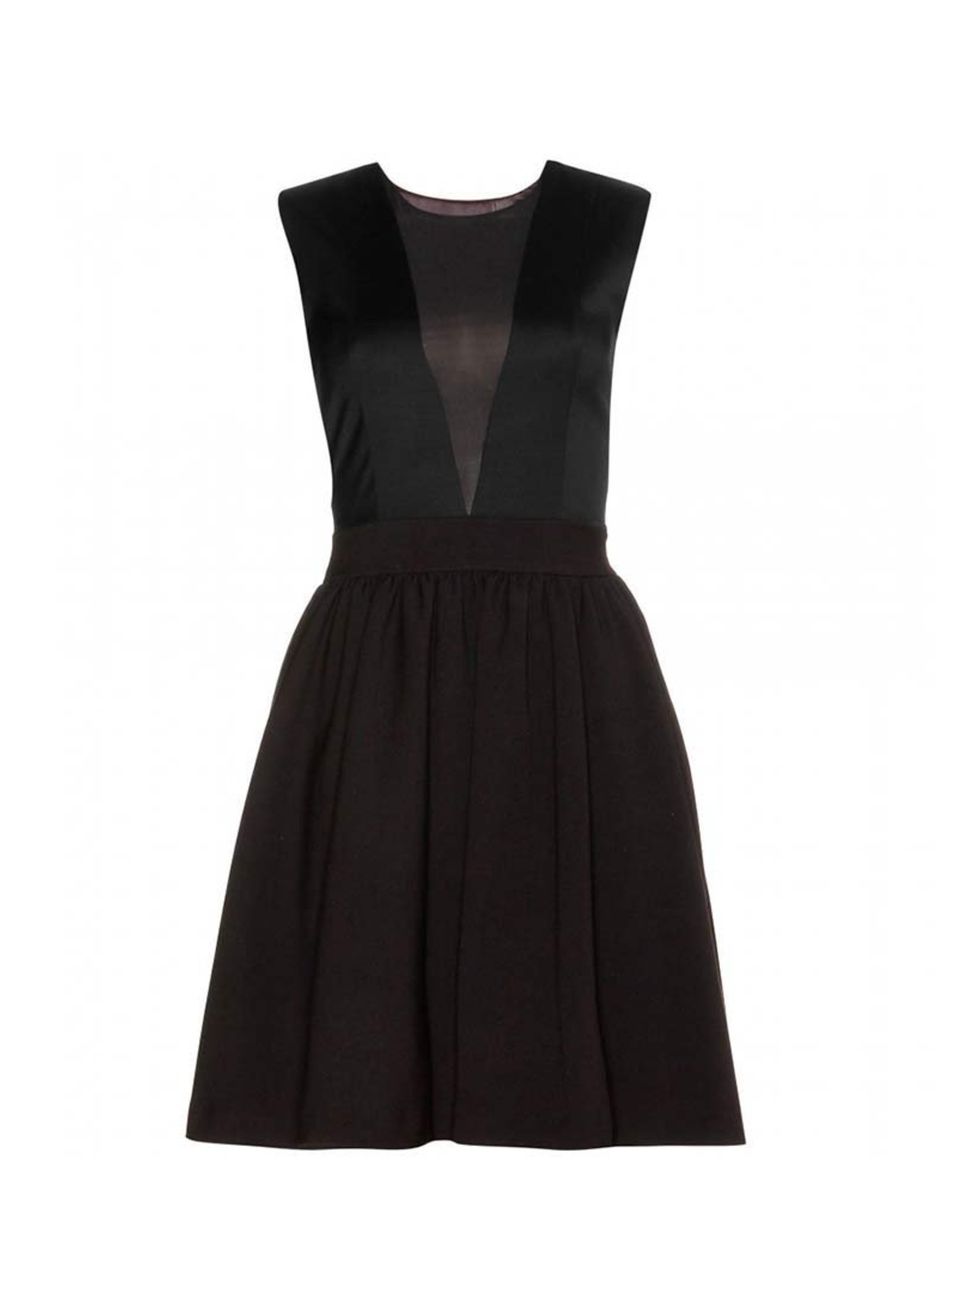 <p>By Malene Birger contrasts a daring semi-sheer chiffon V-front with a full skirt in this head-turning black dress. It is £235 at <a href="http://www.mytheresa.com/en-gb/imaska-chiffon-trimmed-crepe-dress.html">My Theresa</a>. </p>